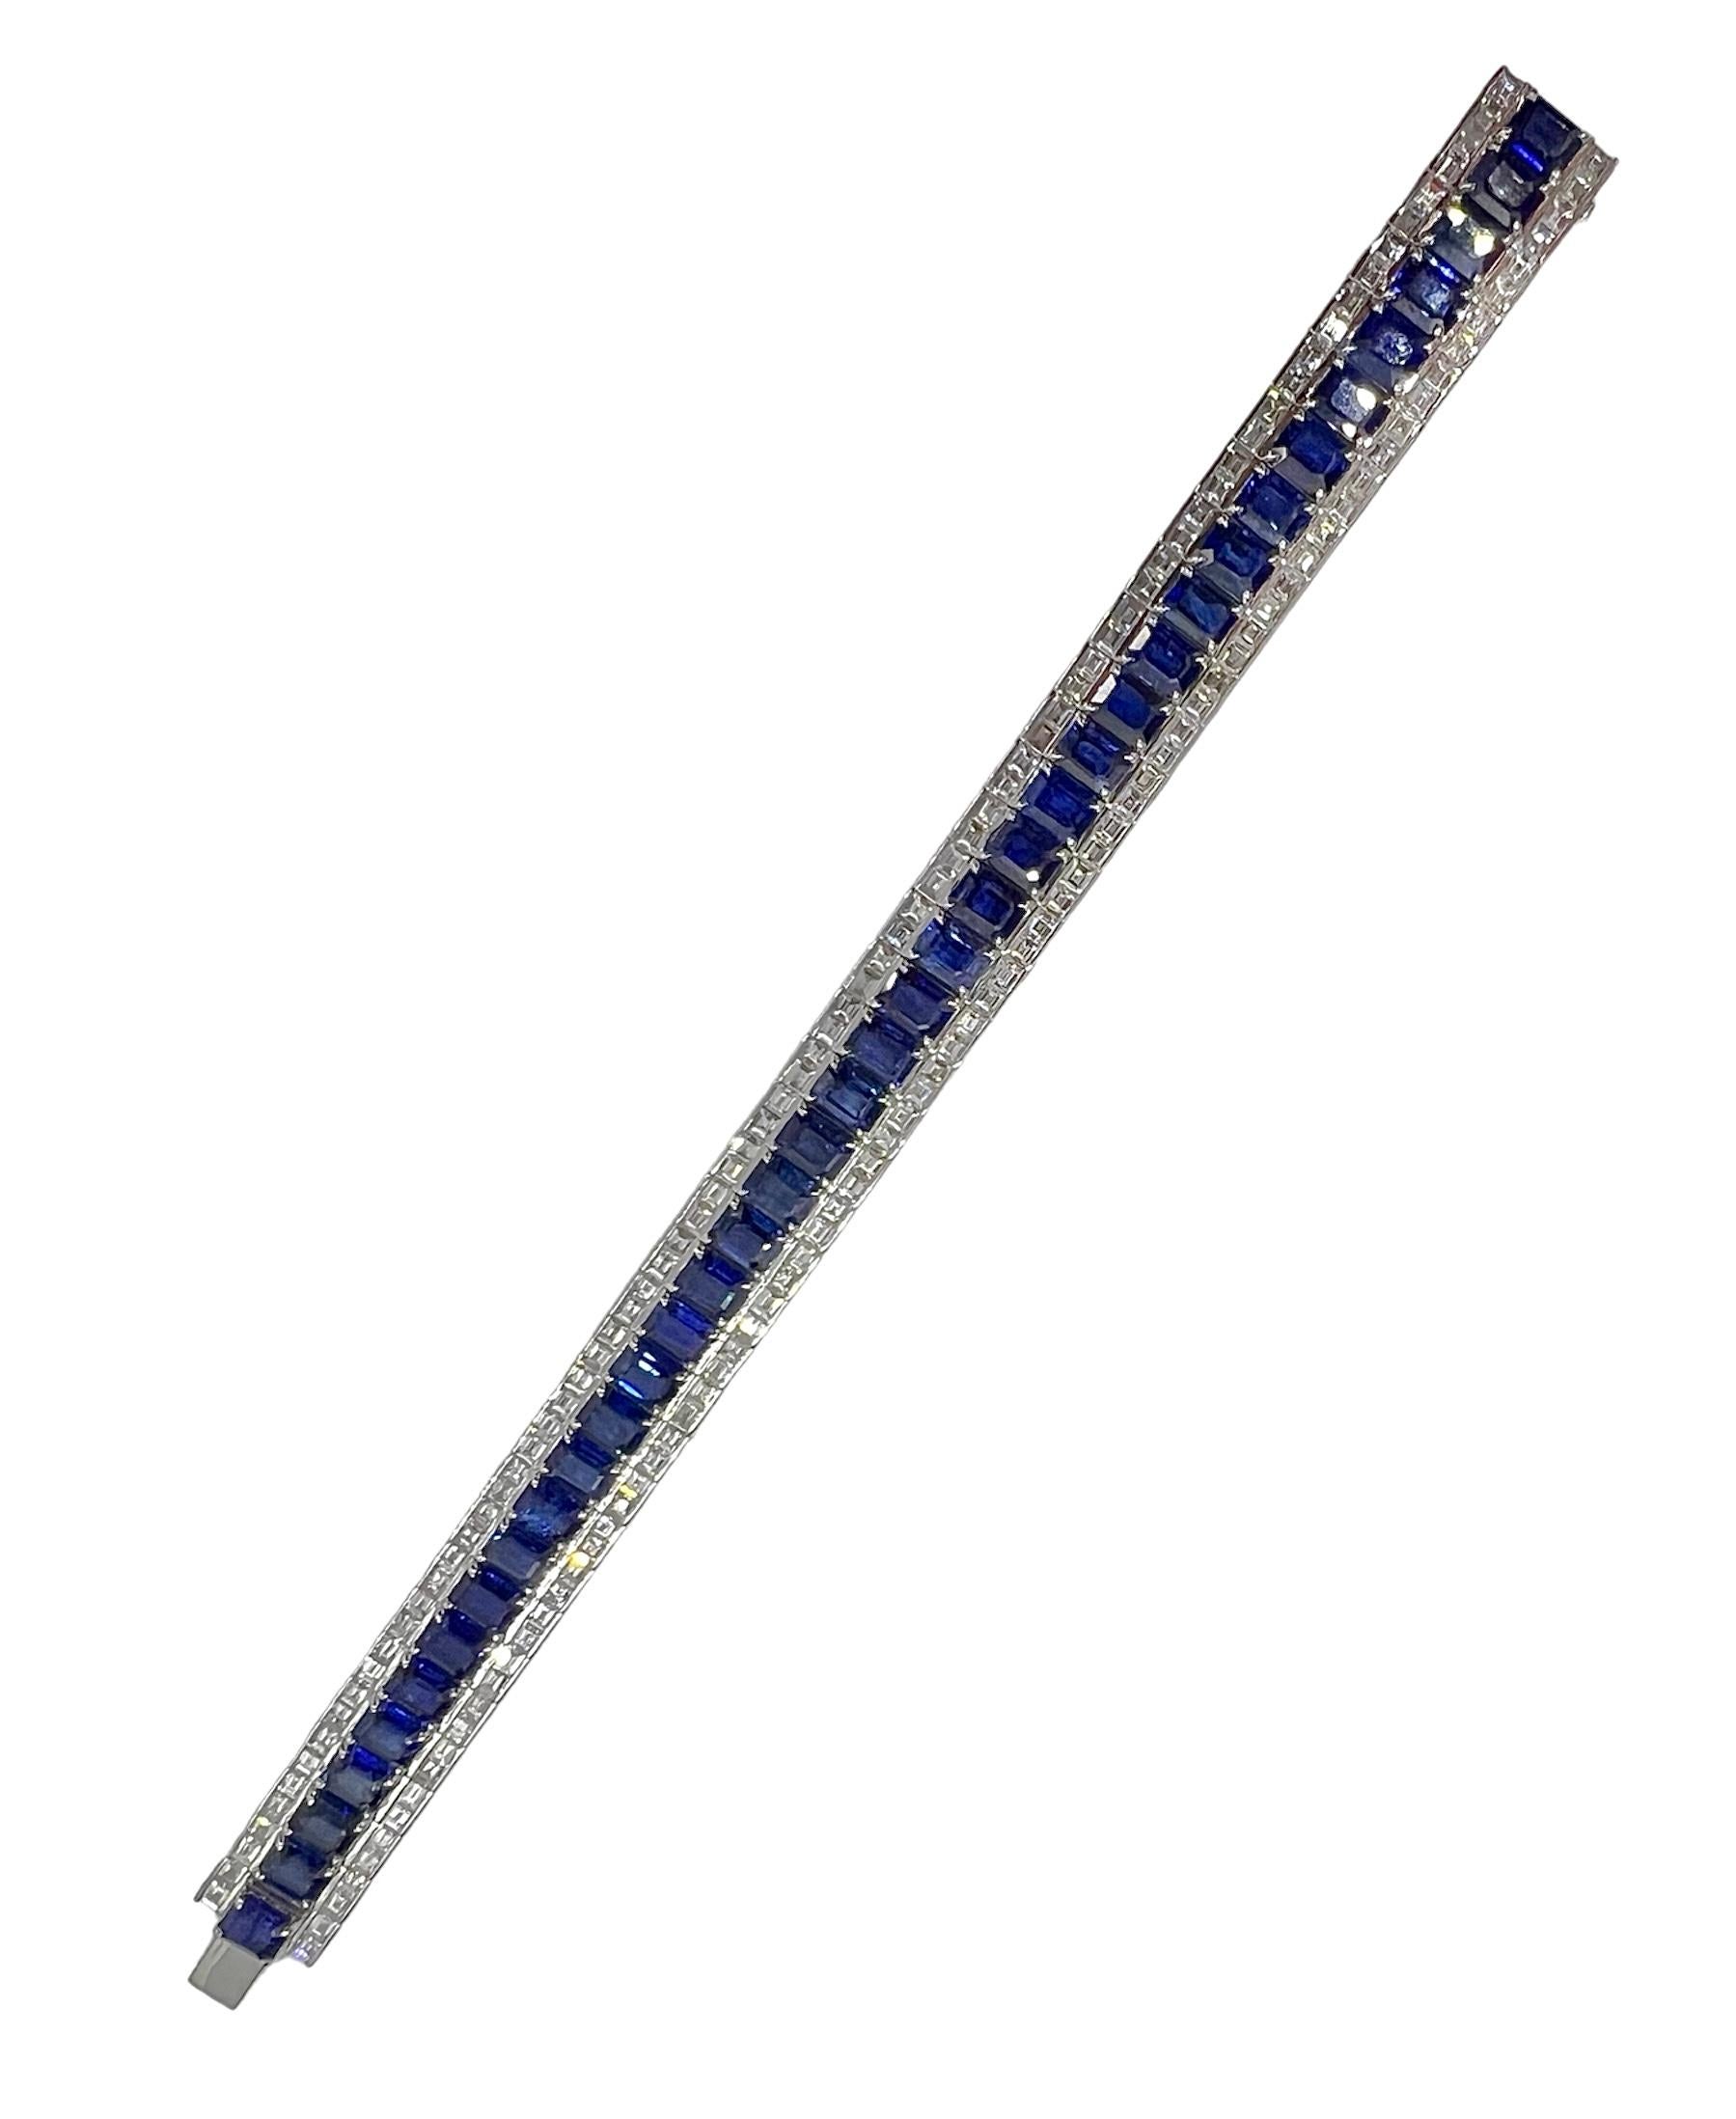 Platinum bracelet with 7.62 carat of diamonds and 27.45 carat of blue sapphire.

Sophia D by Joseph Dardashti LTD has been known worldwide for 35 years and are inspired by classic Art Deco design that merges with modern manufacturing techniques.
